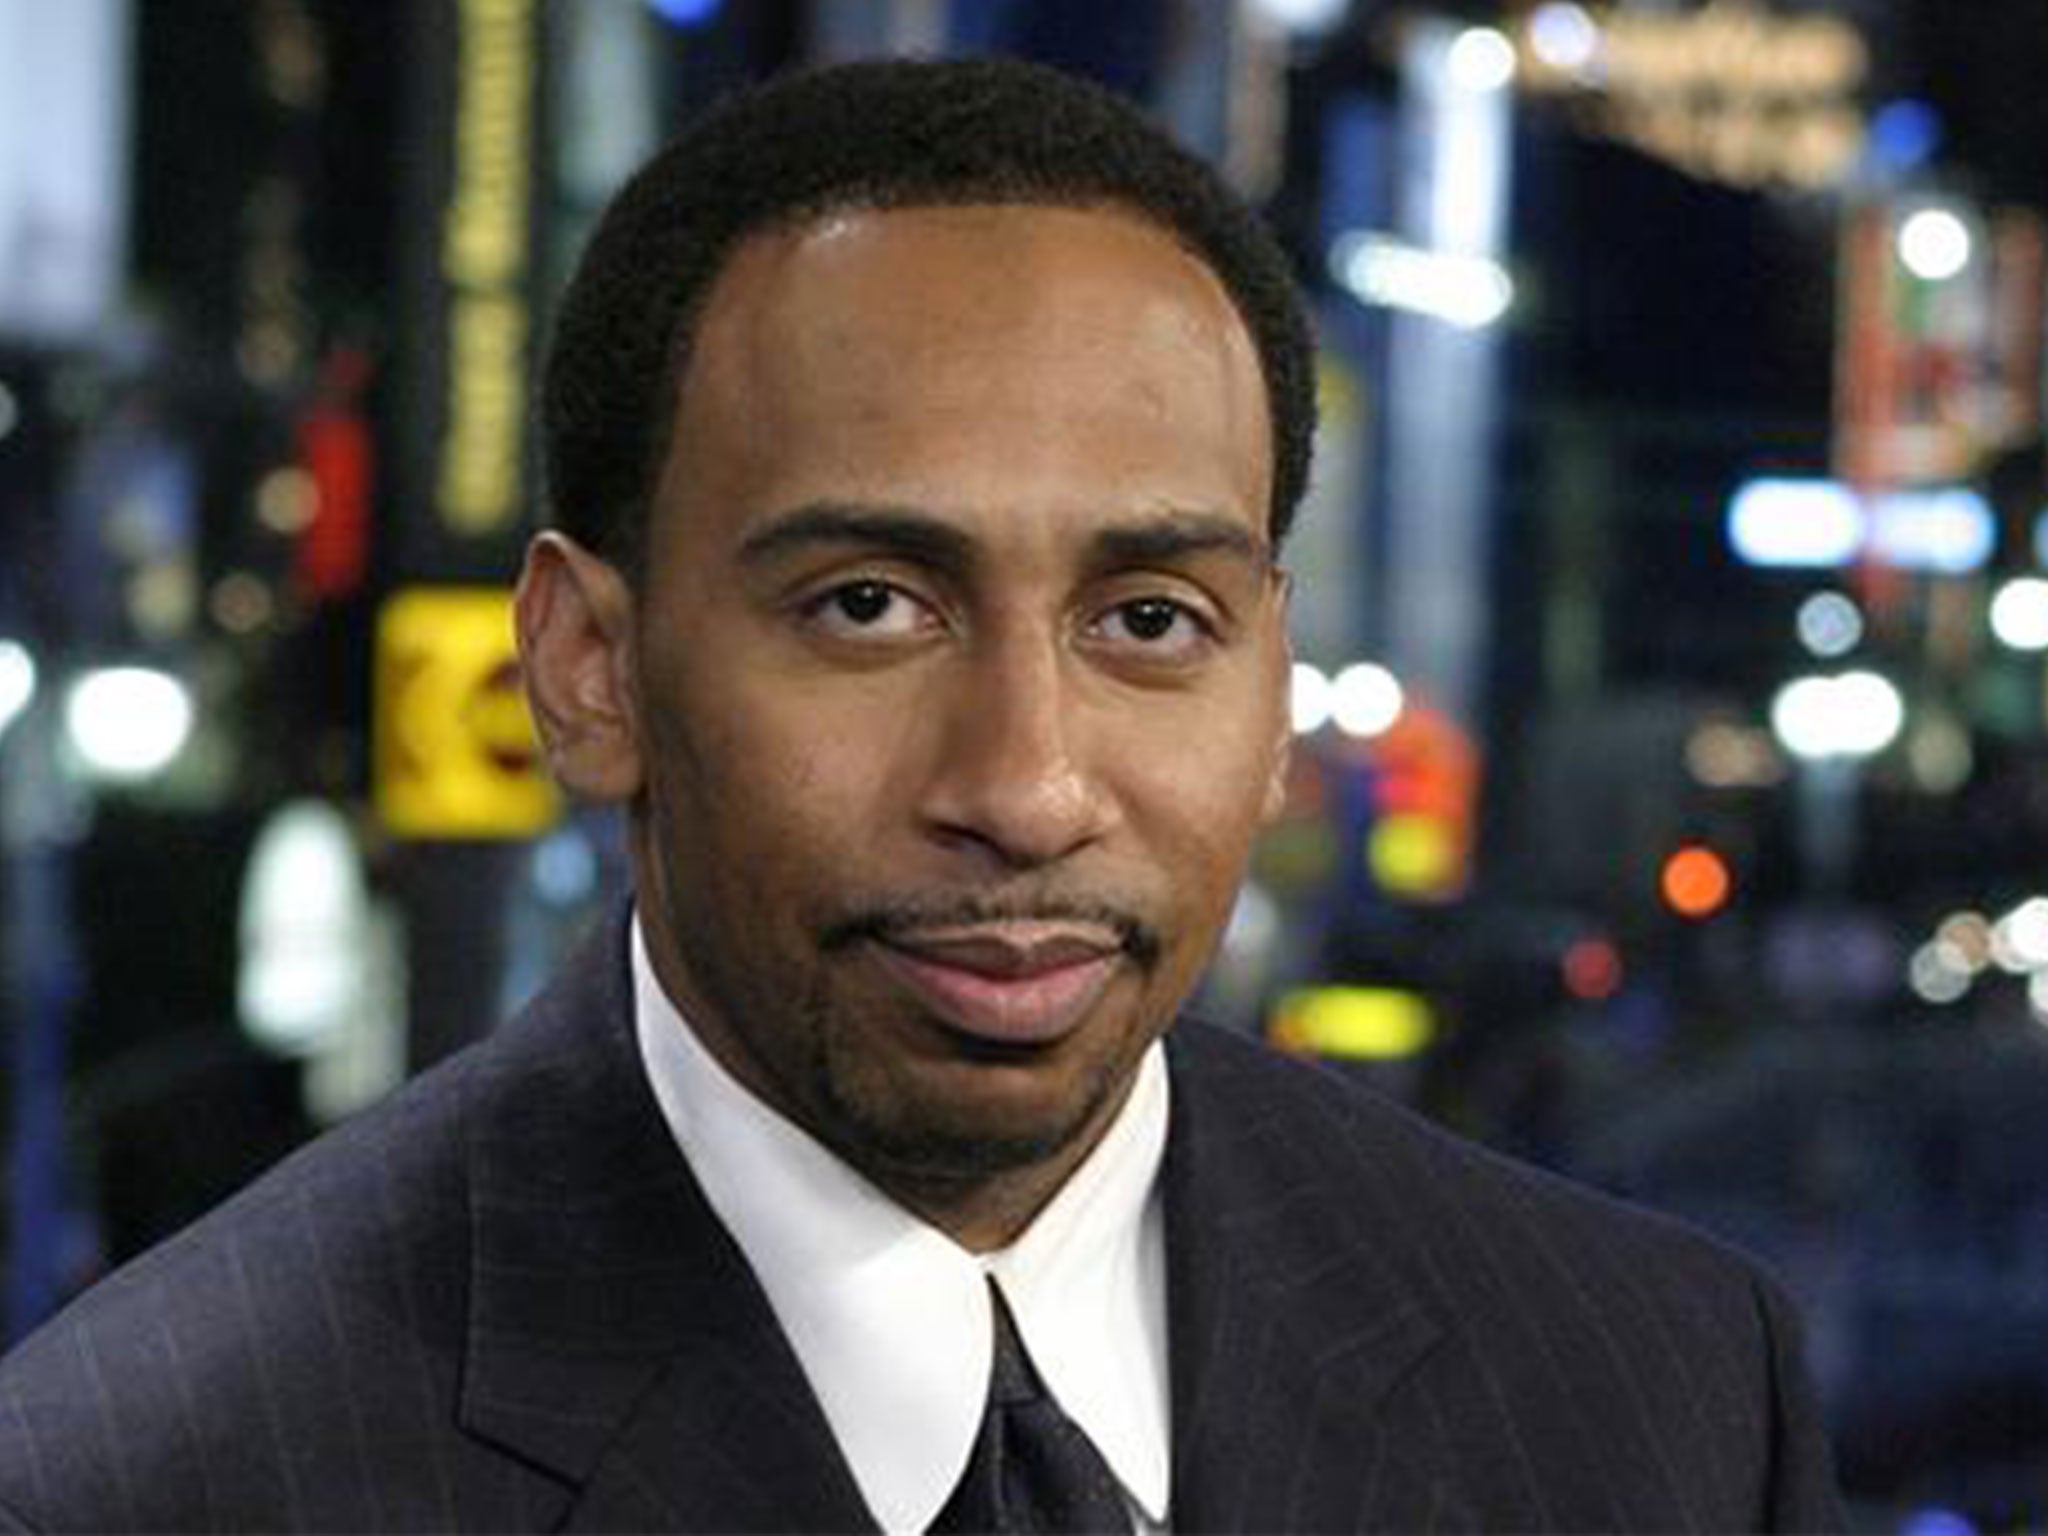 Smith is a commentator on ESPN's sports show First Take